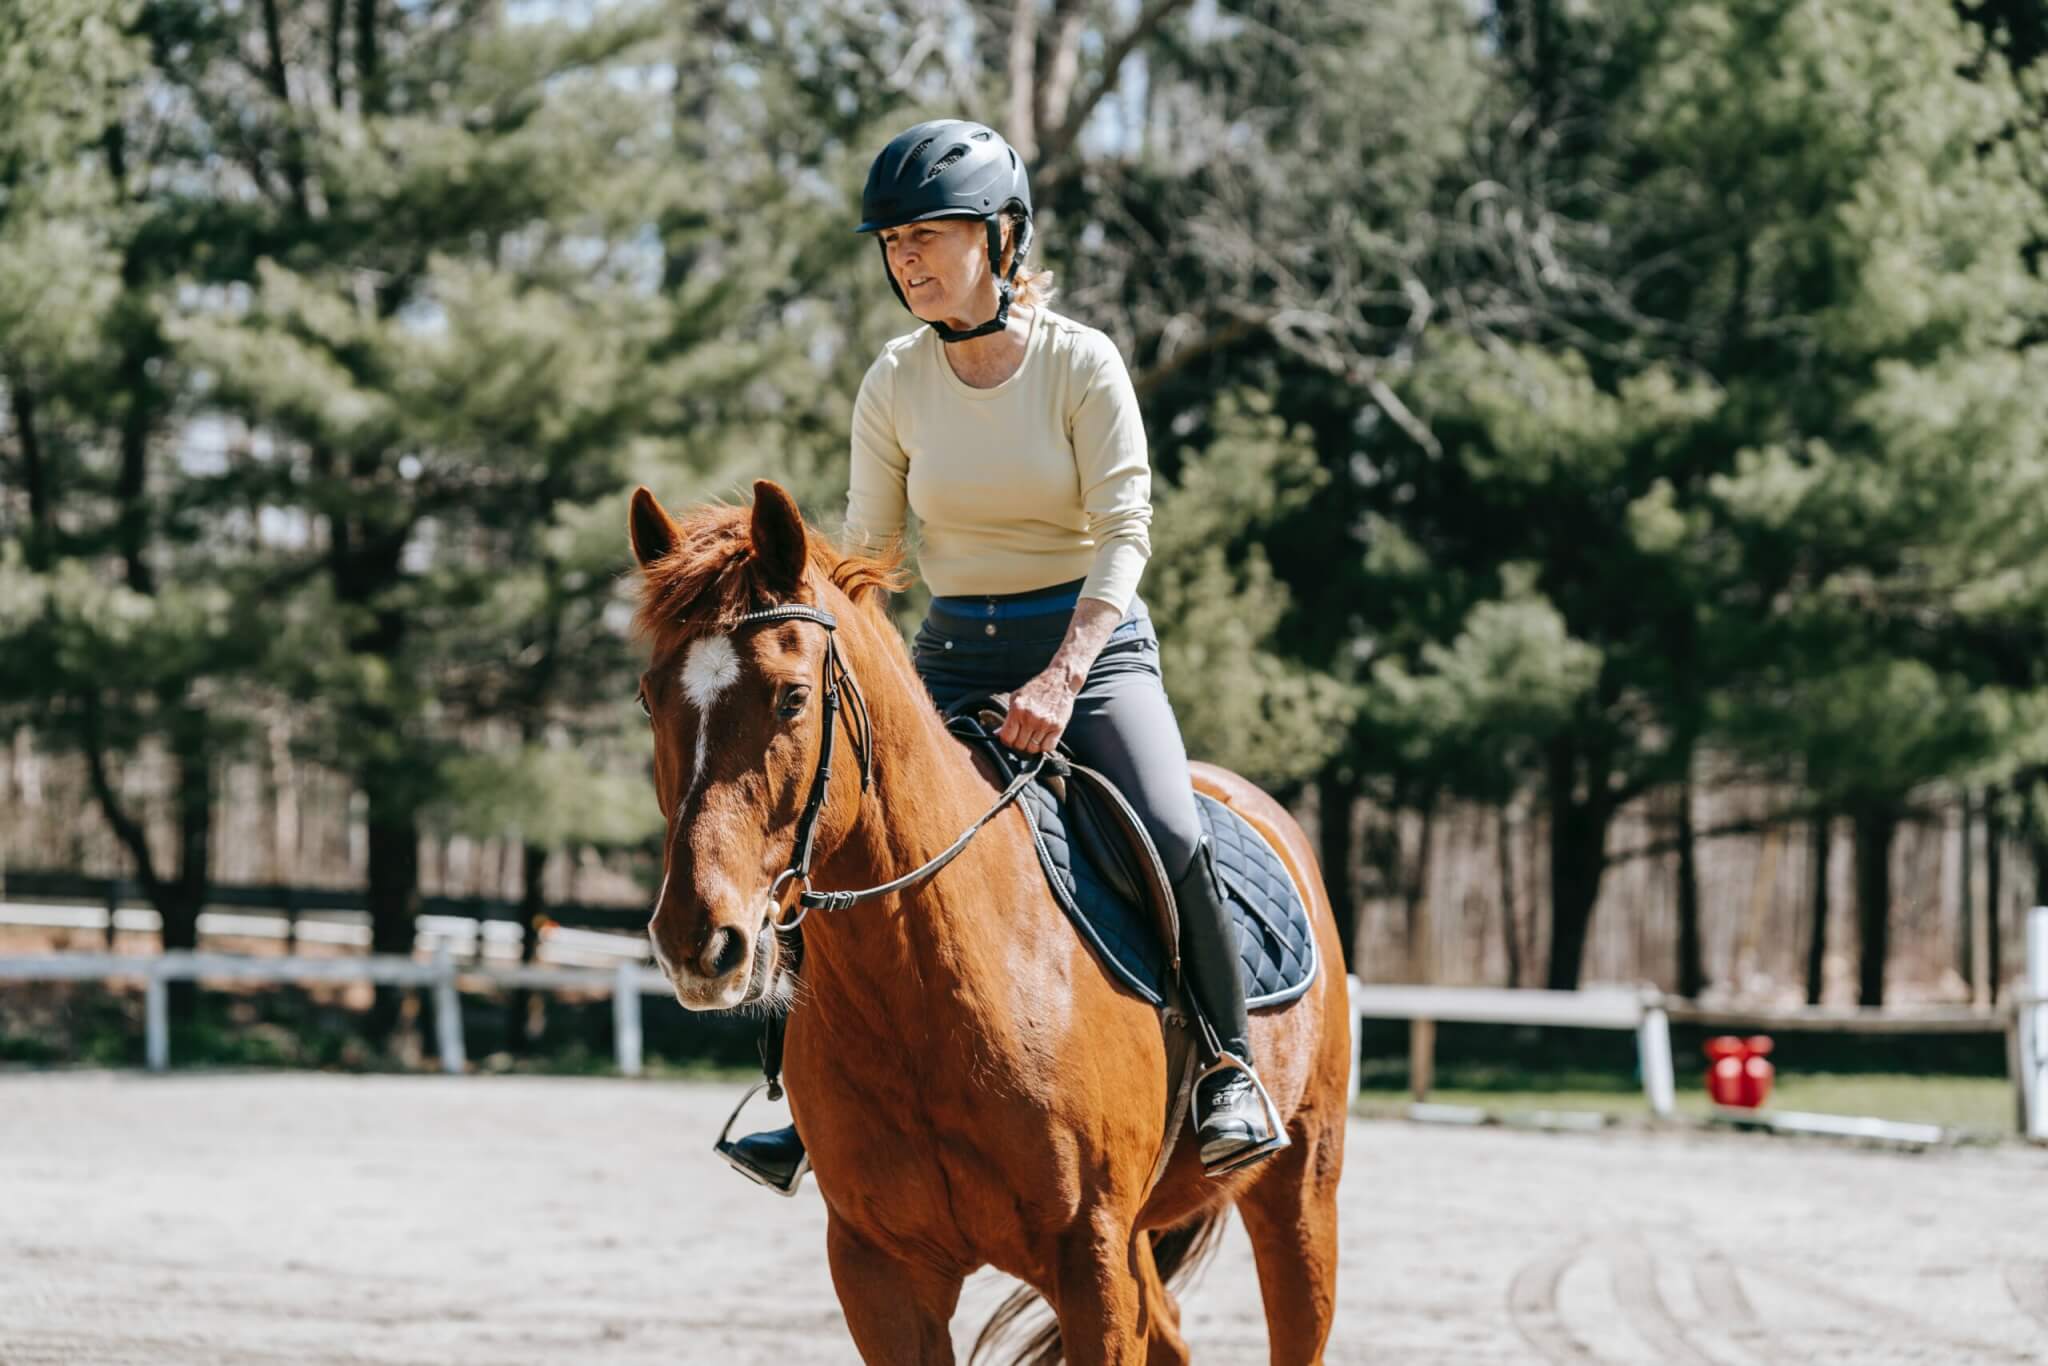 Battling back pain? Taking up horseback riding can actually bring relief